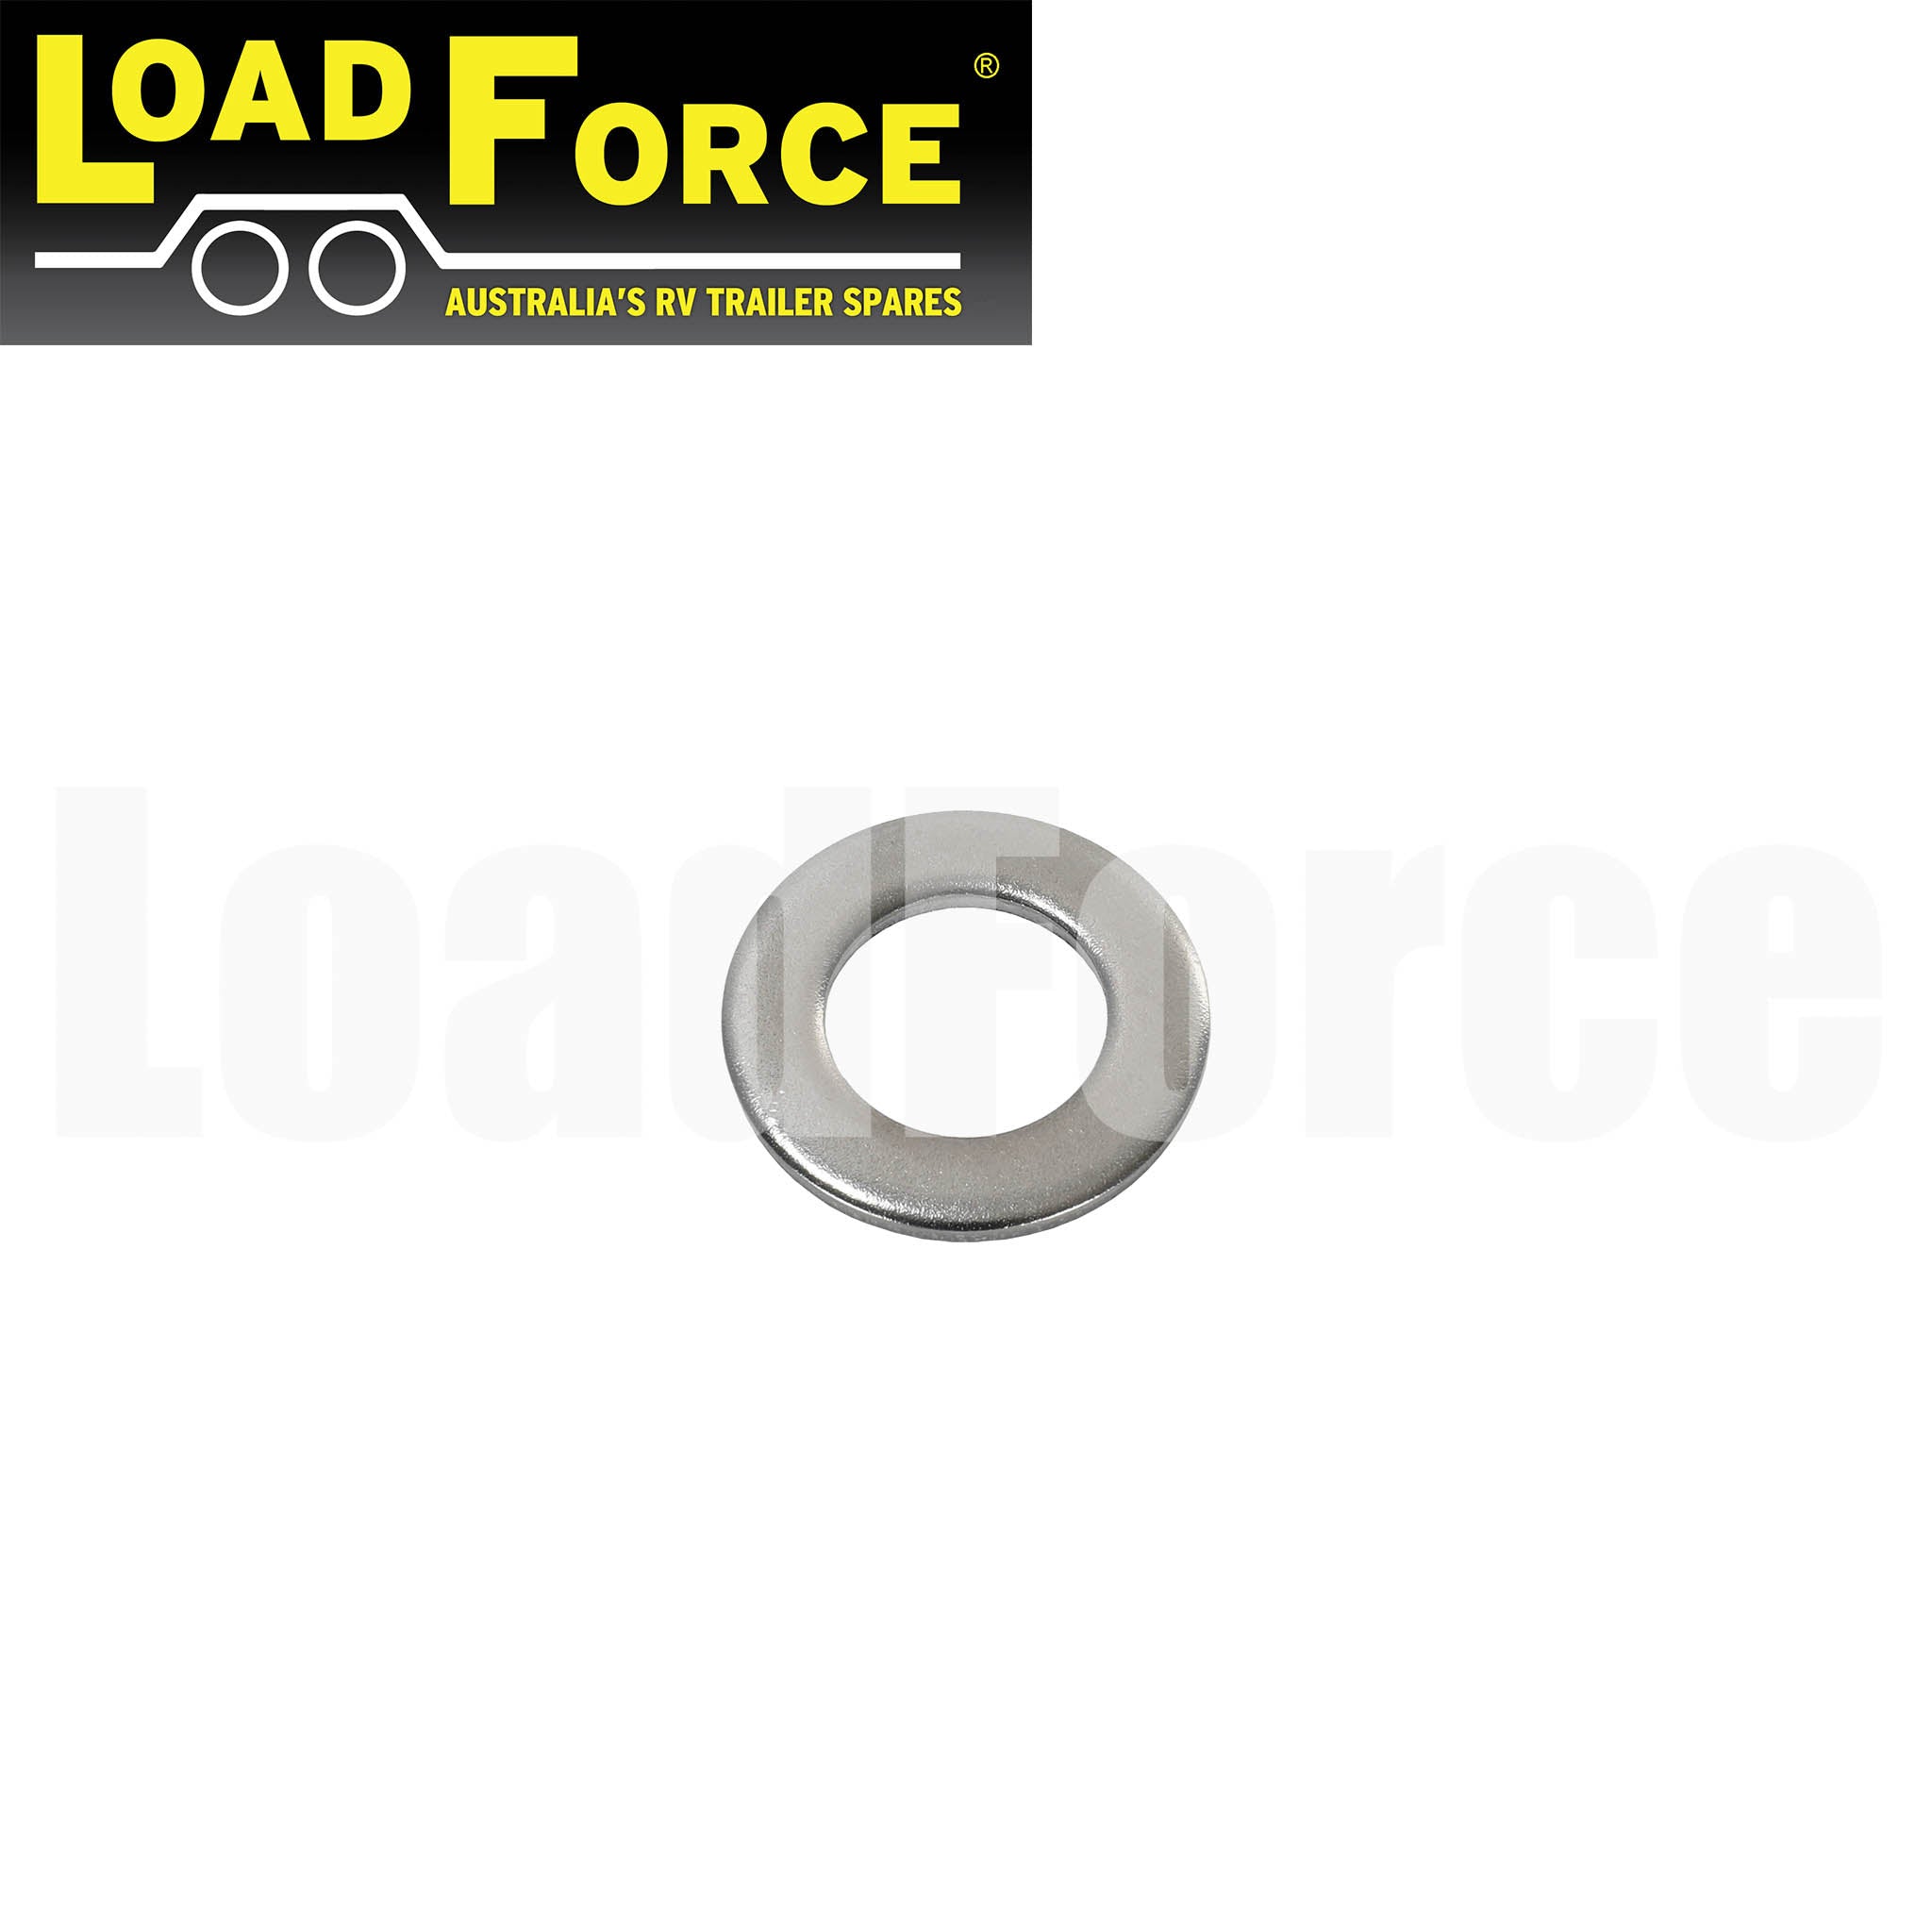 Boat Trailer Roller Spindle Washer Suit 24mm Stainless Steel